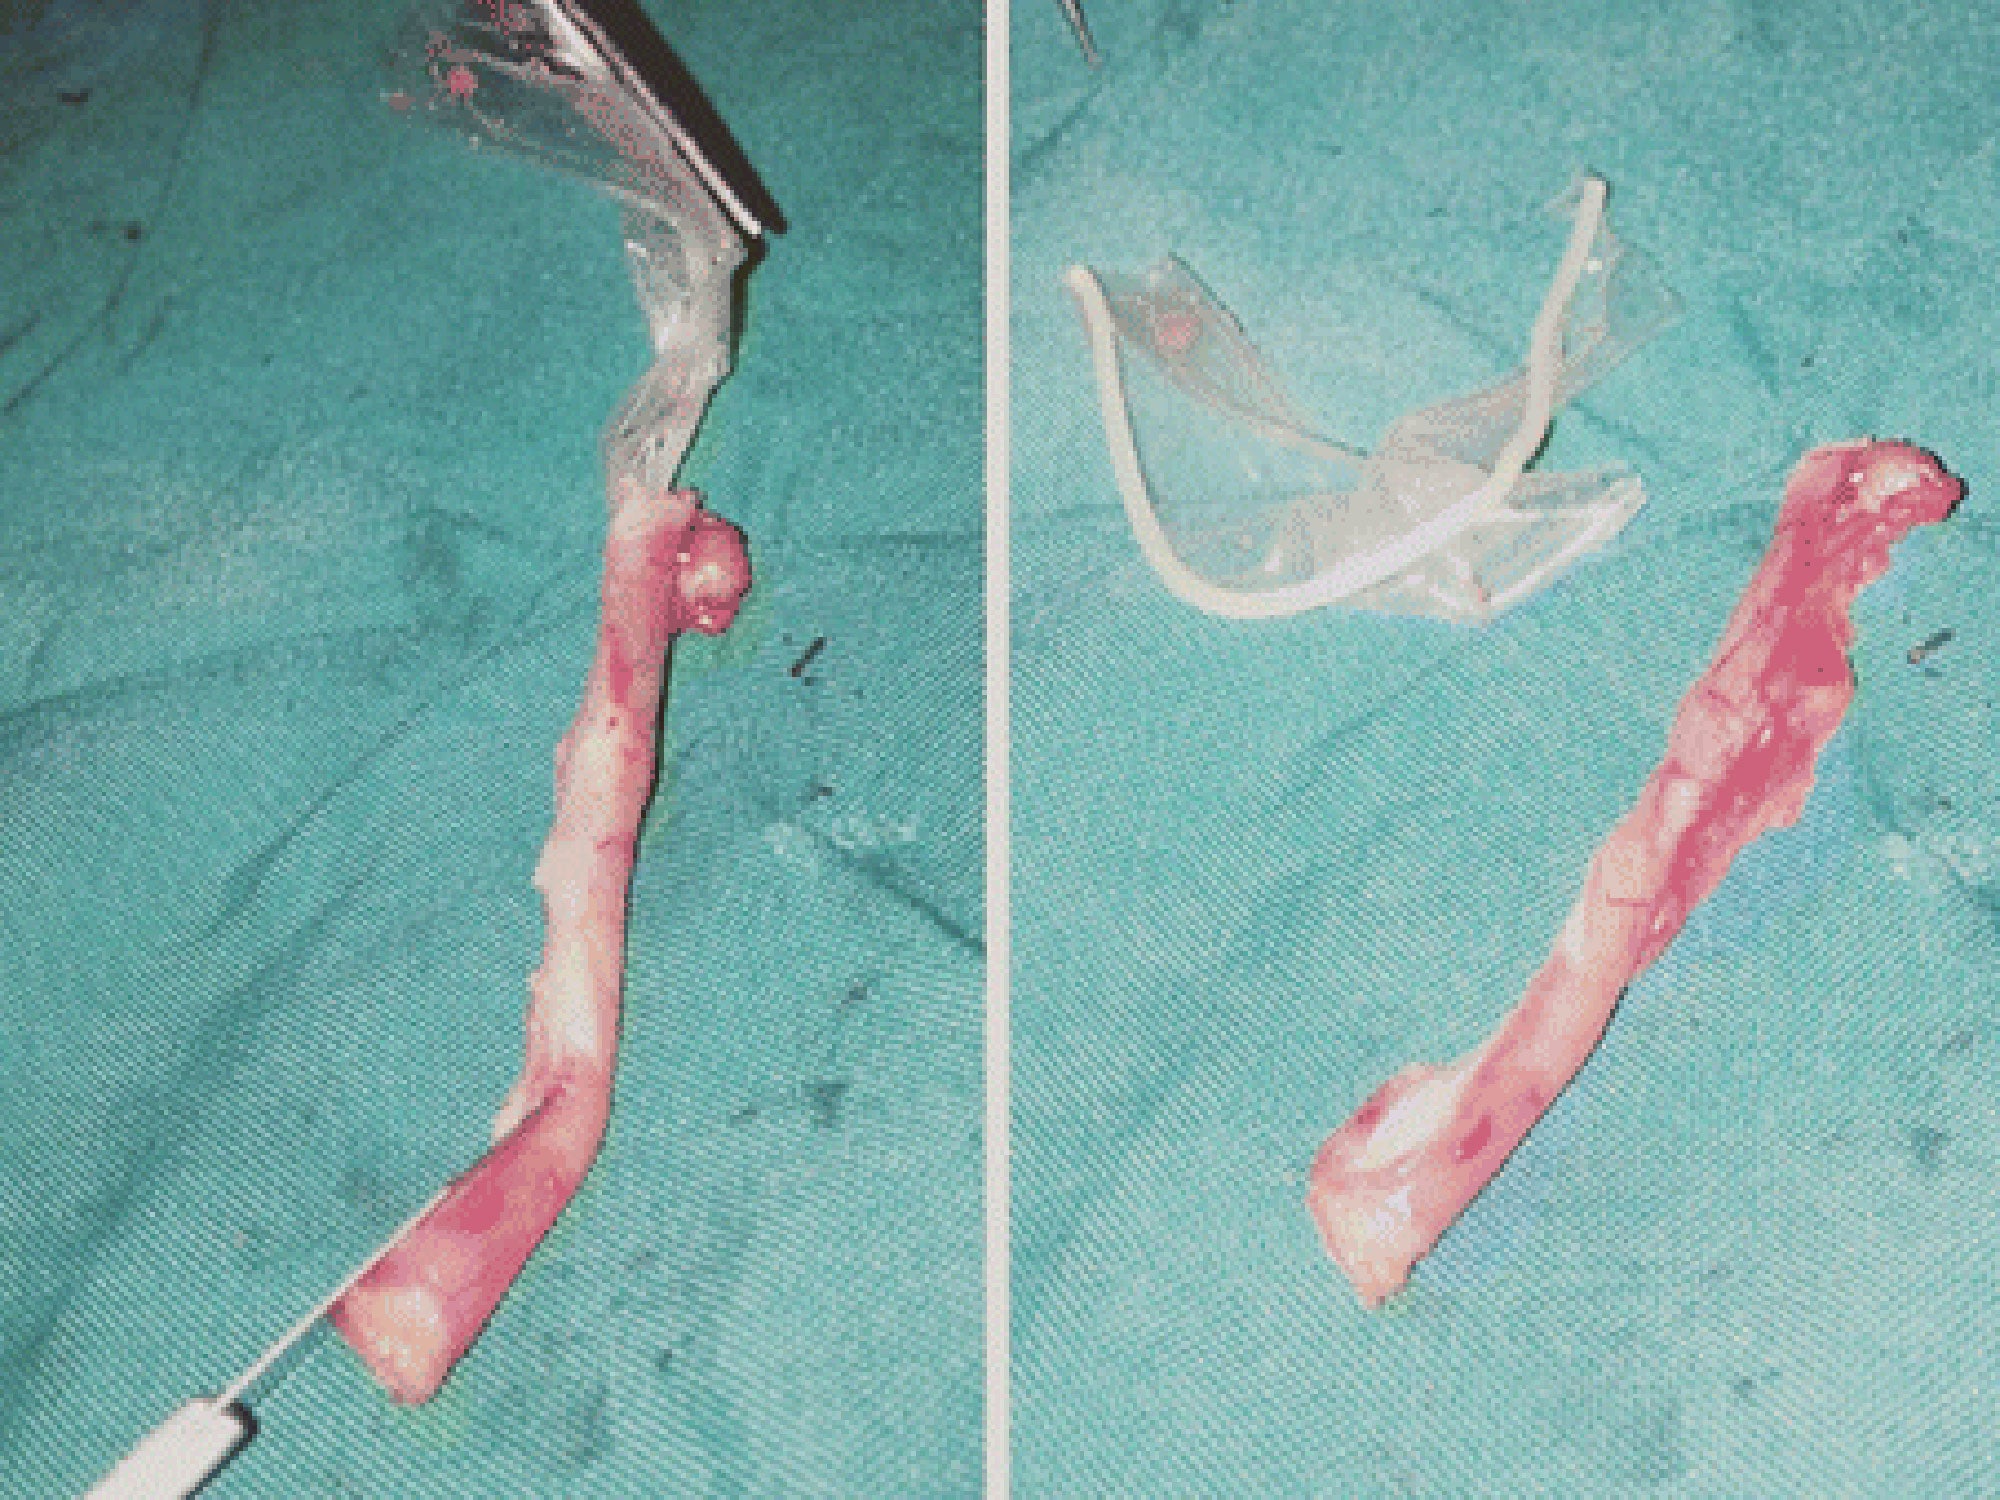 The condom was found inside the appendix after dissection